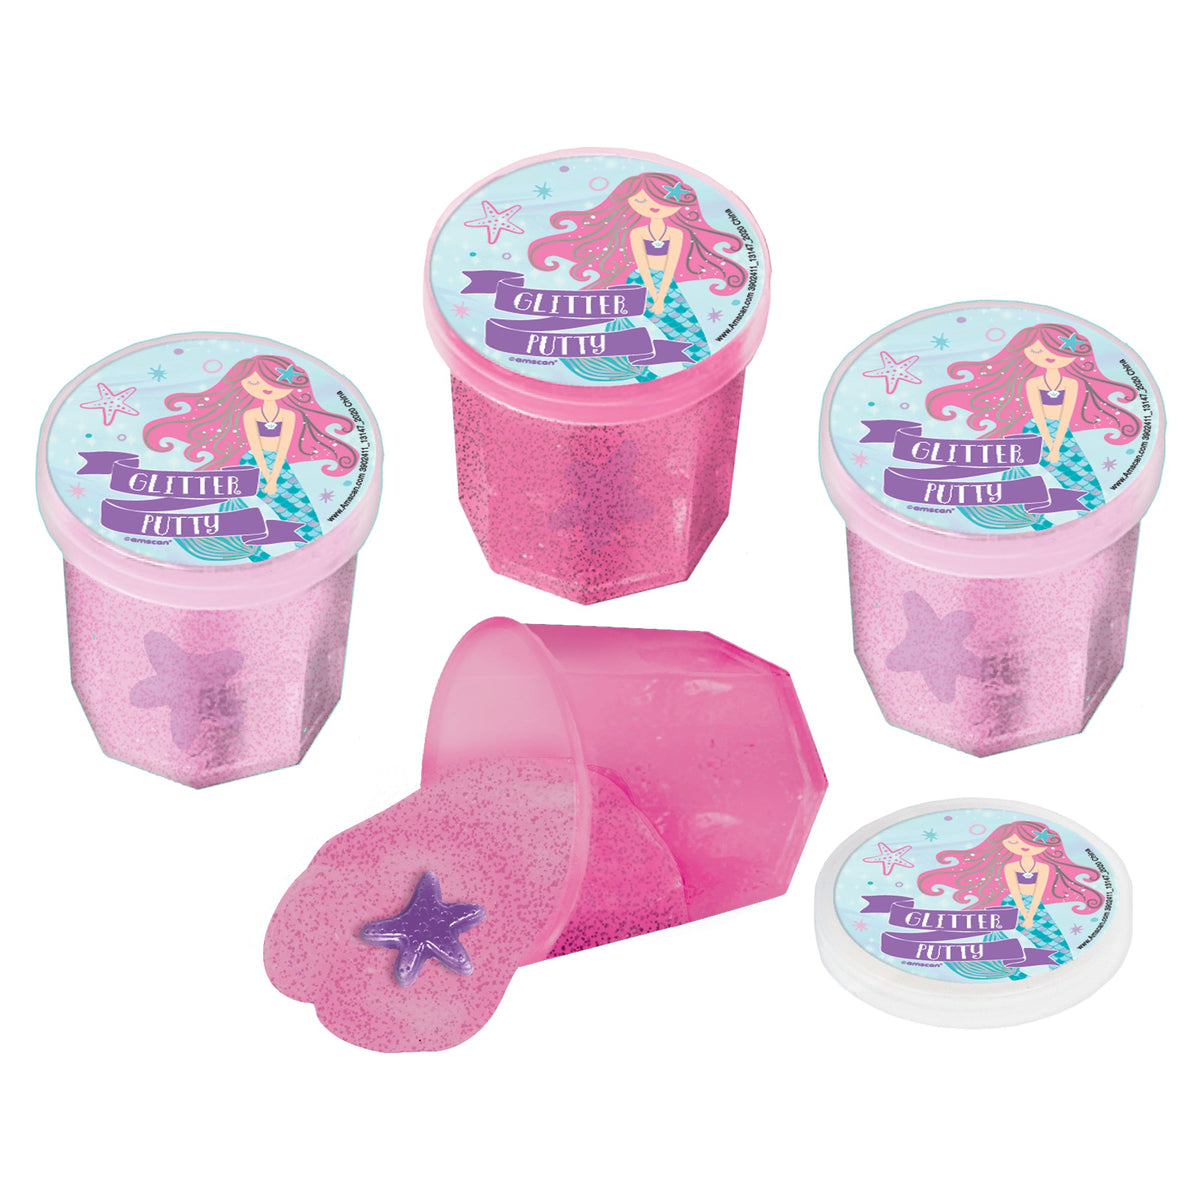 Mermaid Glitter Putty Favor Package of 12